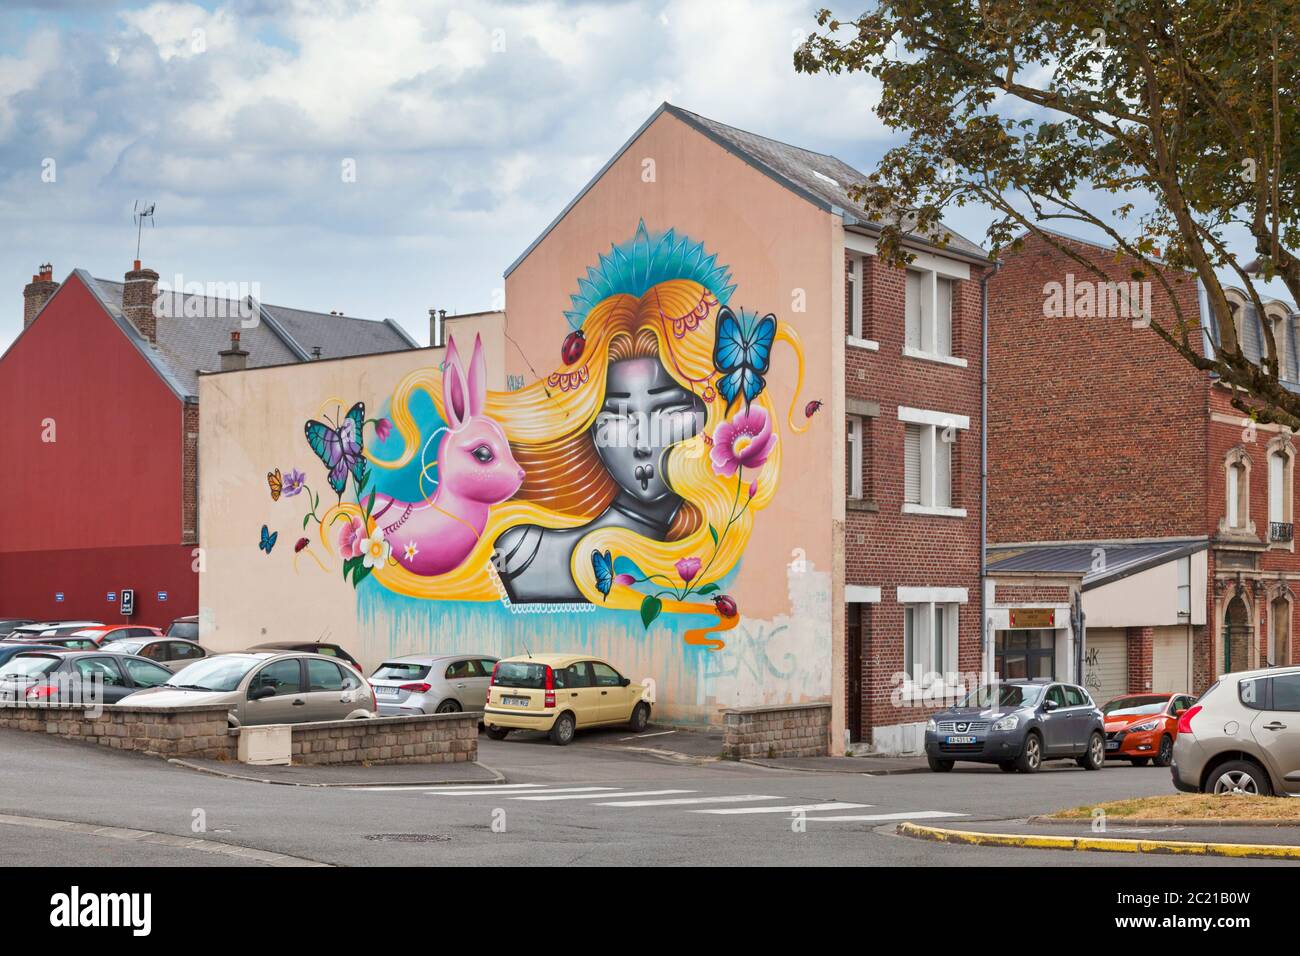 Saint-Quentin, France - June 10 2020: Mural painted on a wall of the city center by artist Kaldea. Stock Photo